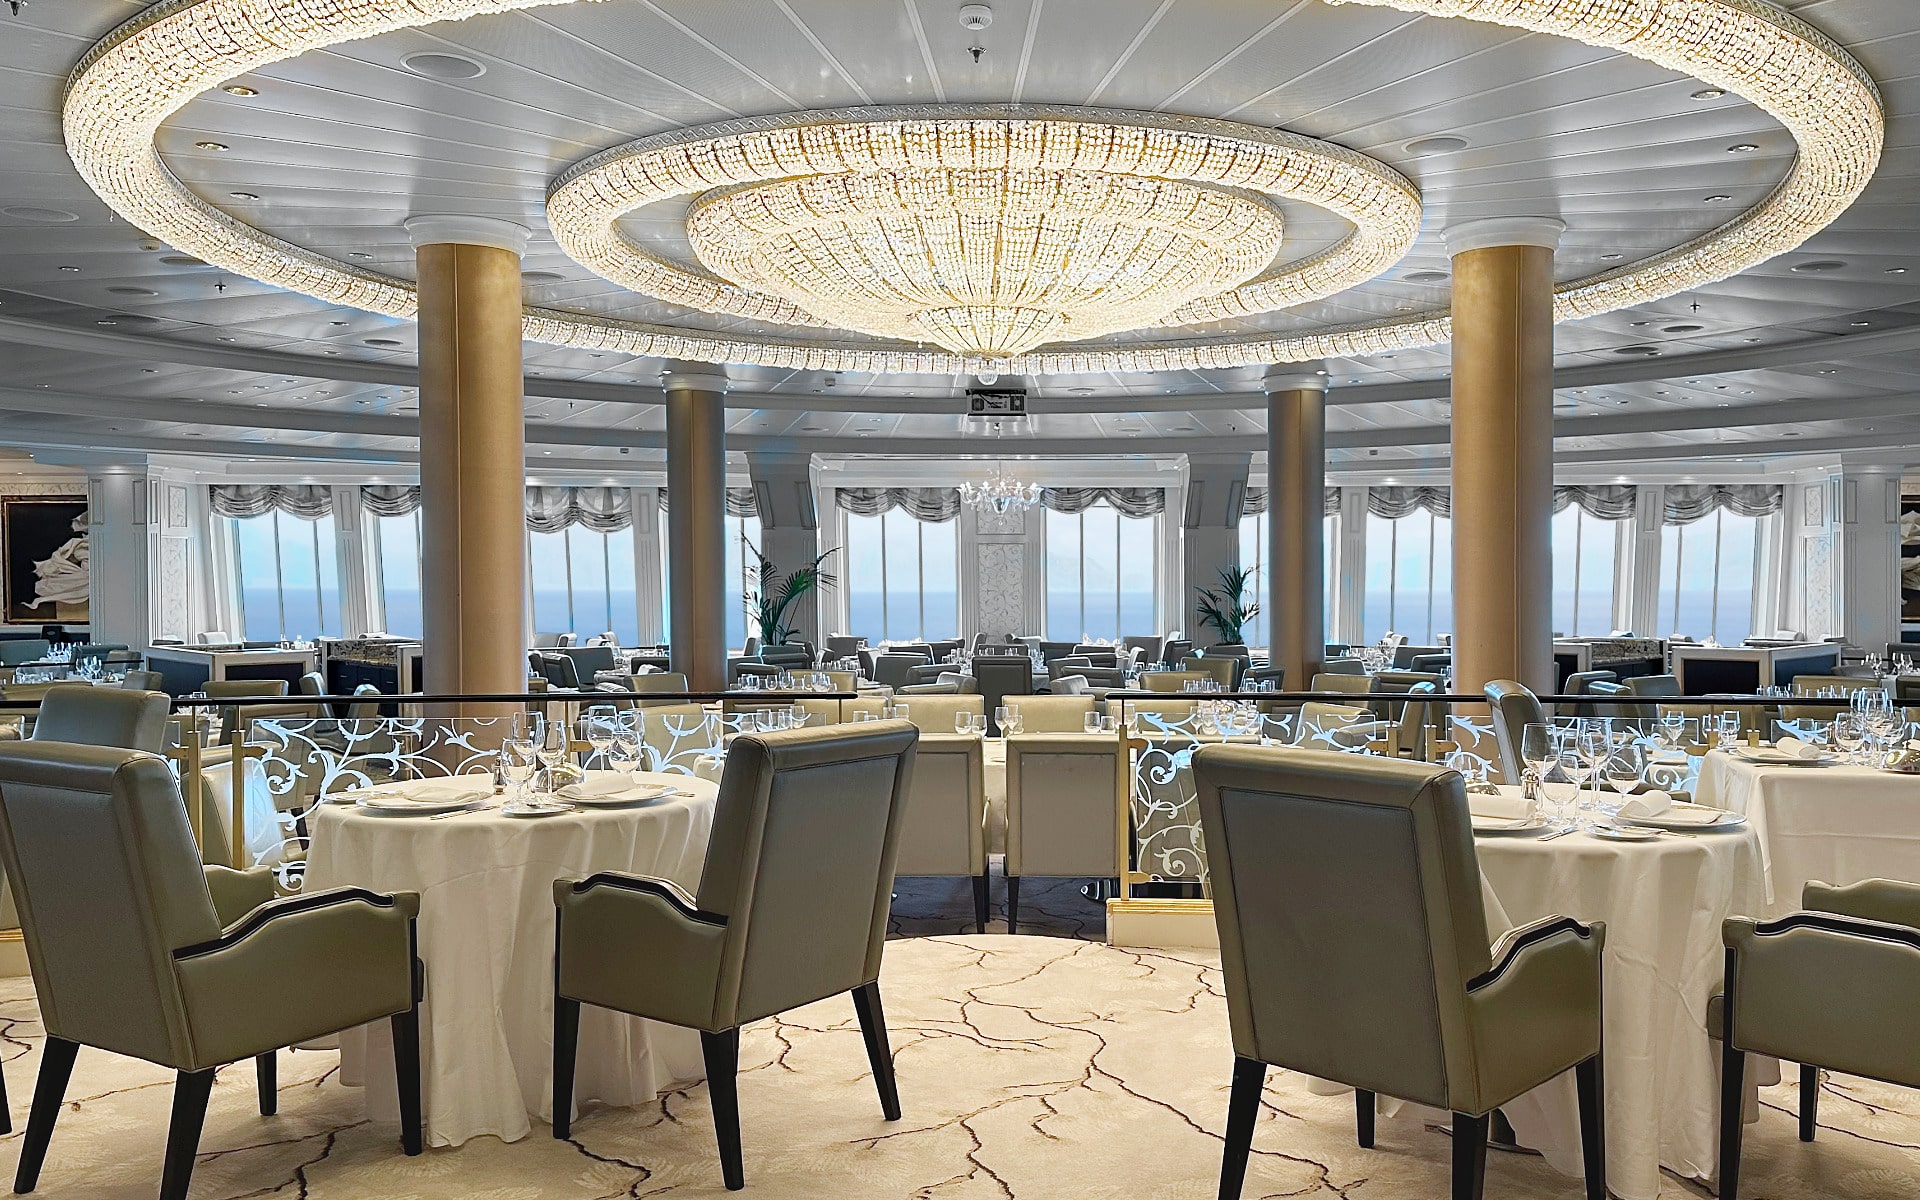 The Grand Dining Room on Oceania's Riviera cruise ship.